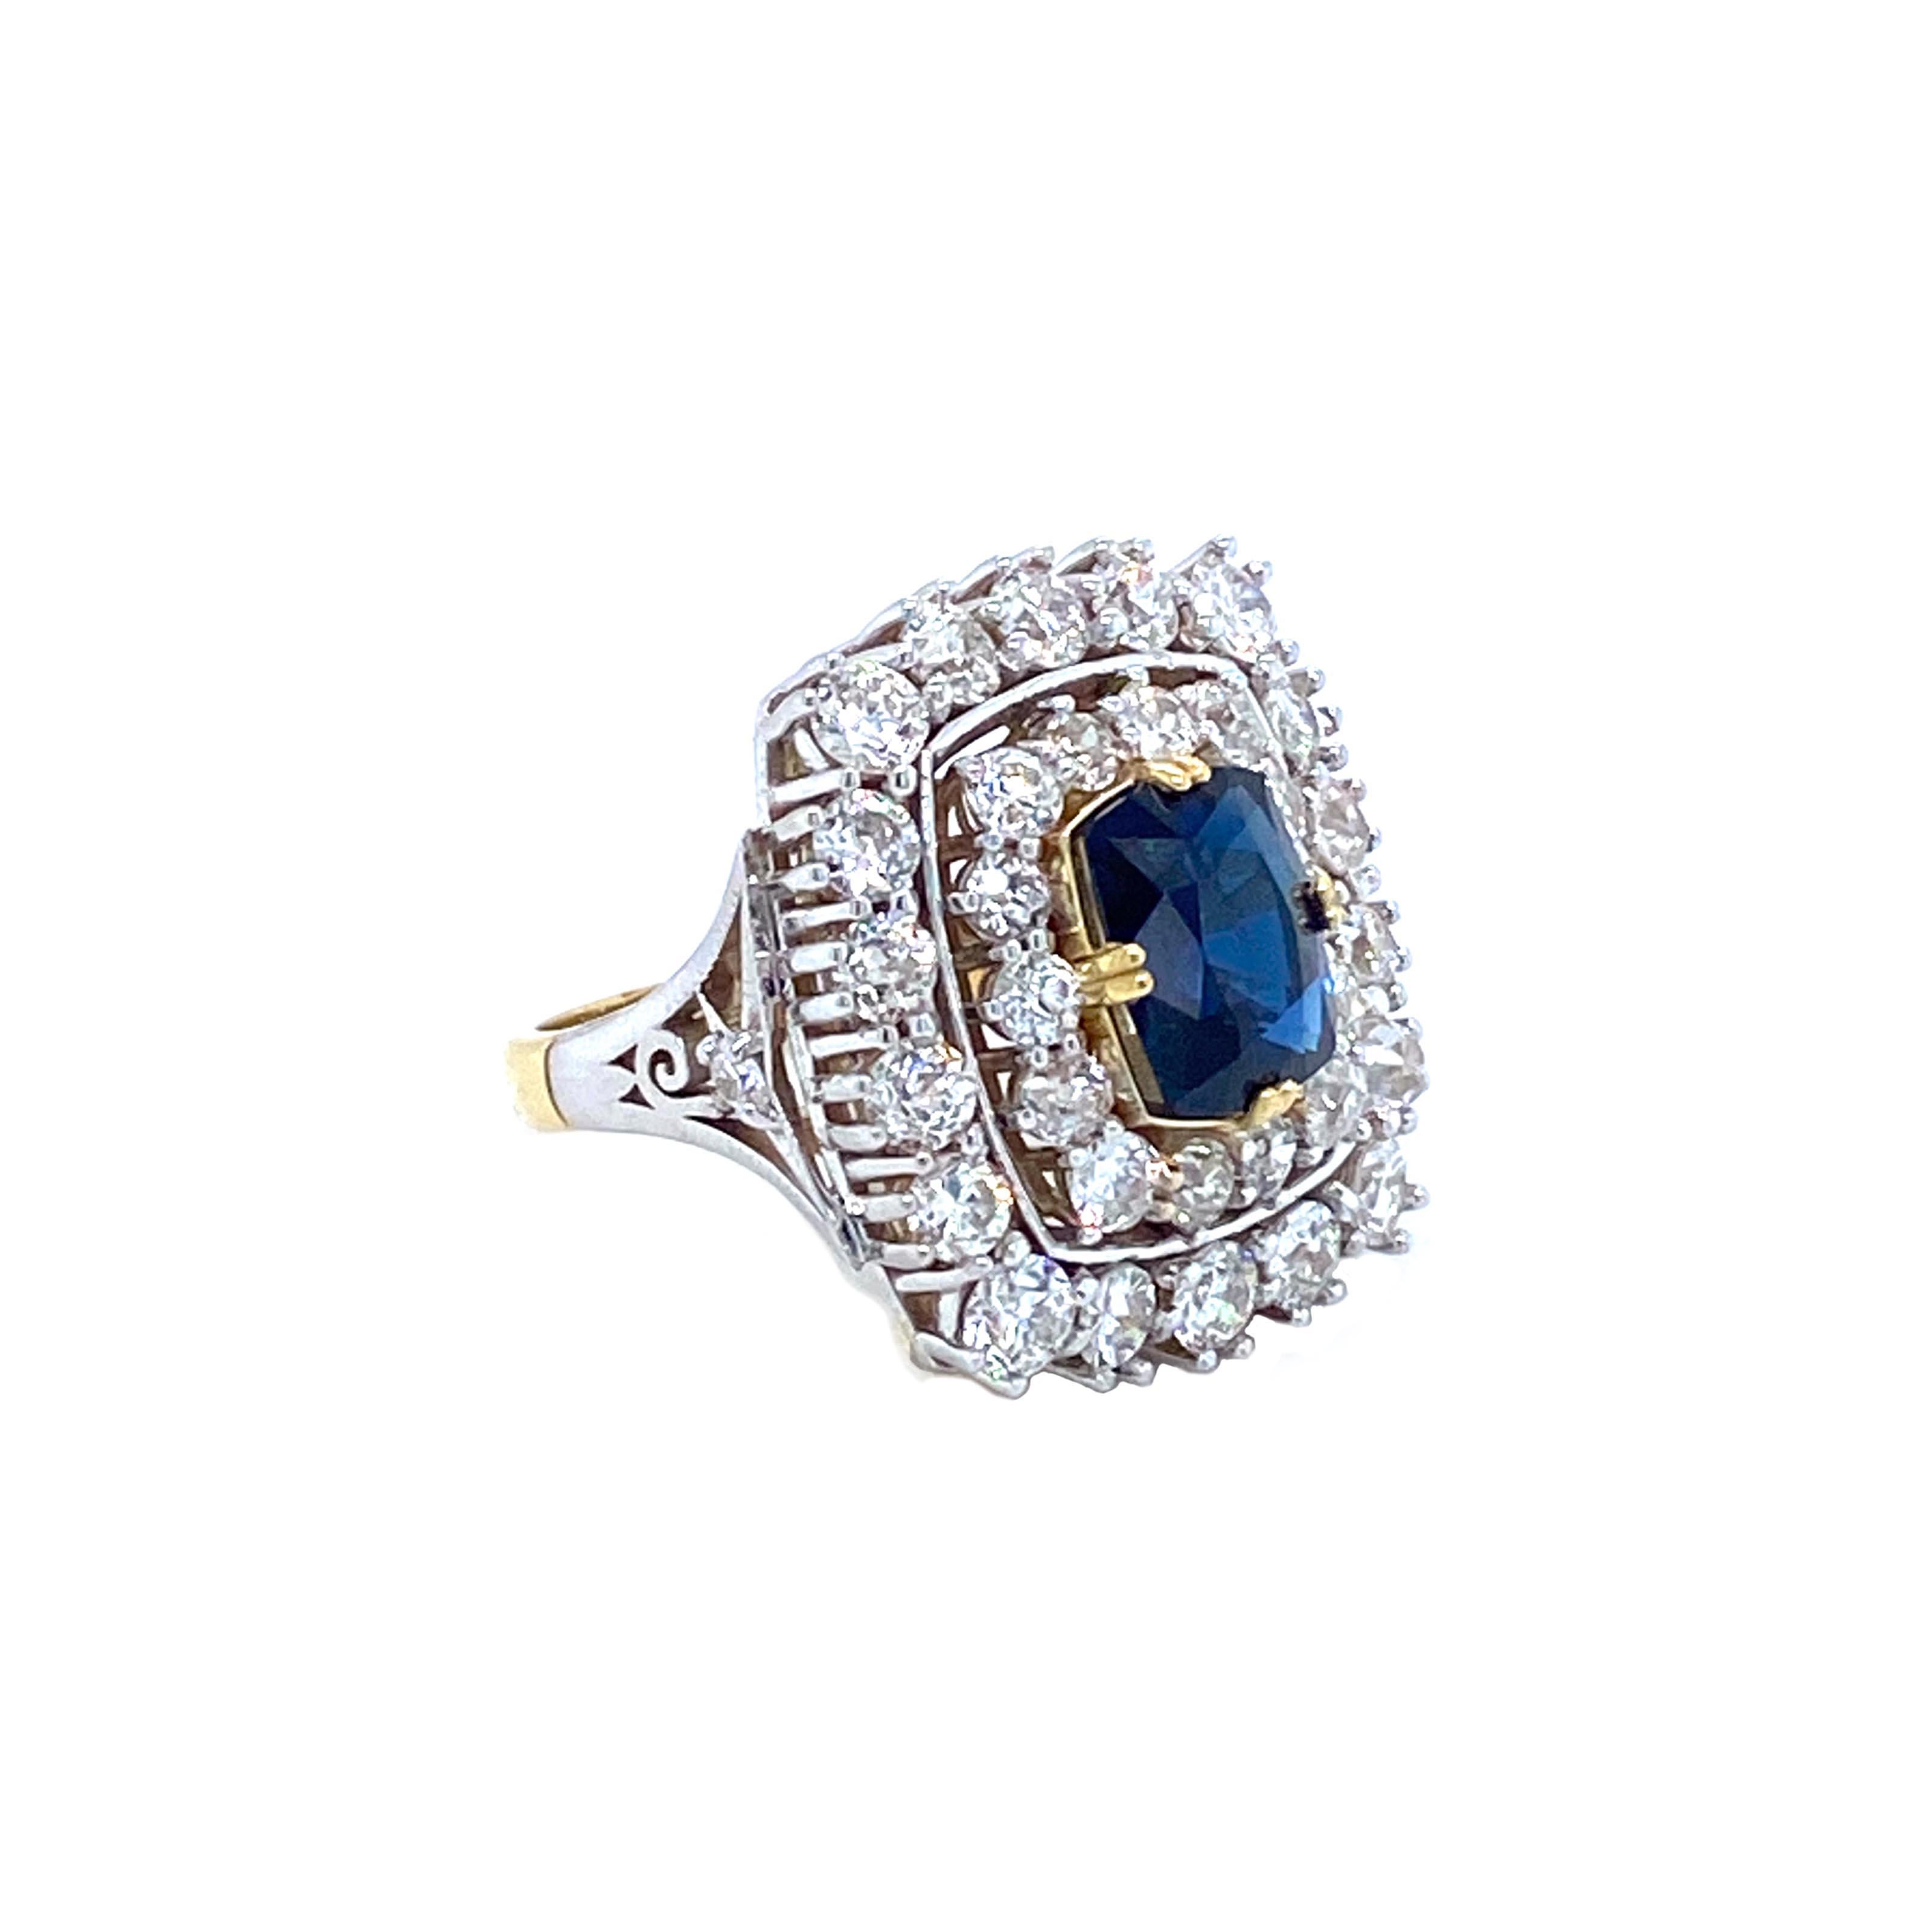 Offered here is a impressive ladies sapphire and diamond cocktail ring set in 18kt two tone gold. The ring measures about 1” x 0.90” on top and the shank graduates down to 2.9 mm. The ring is a size 7, but can be sized. The ring is marked 18k and